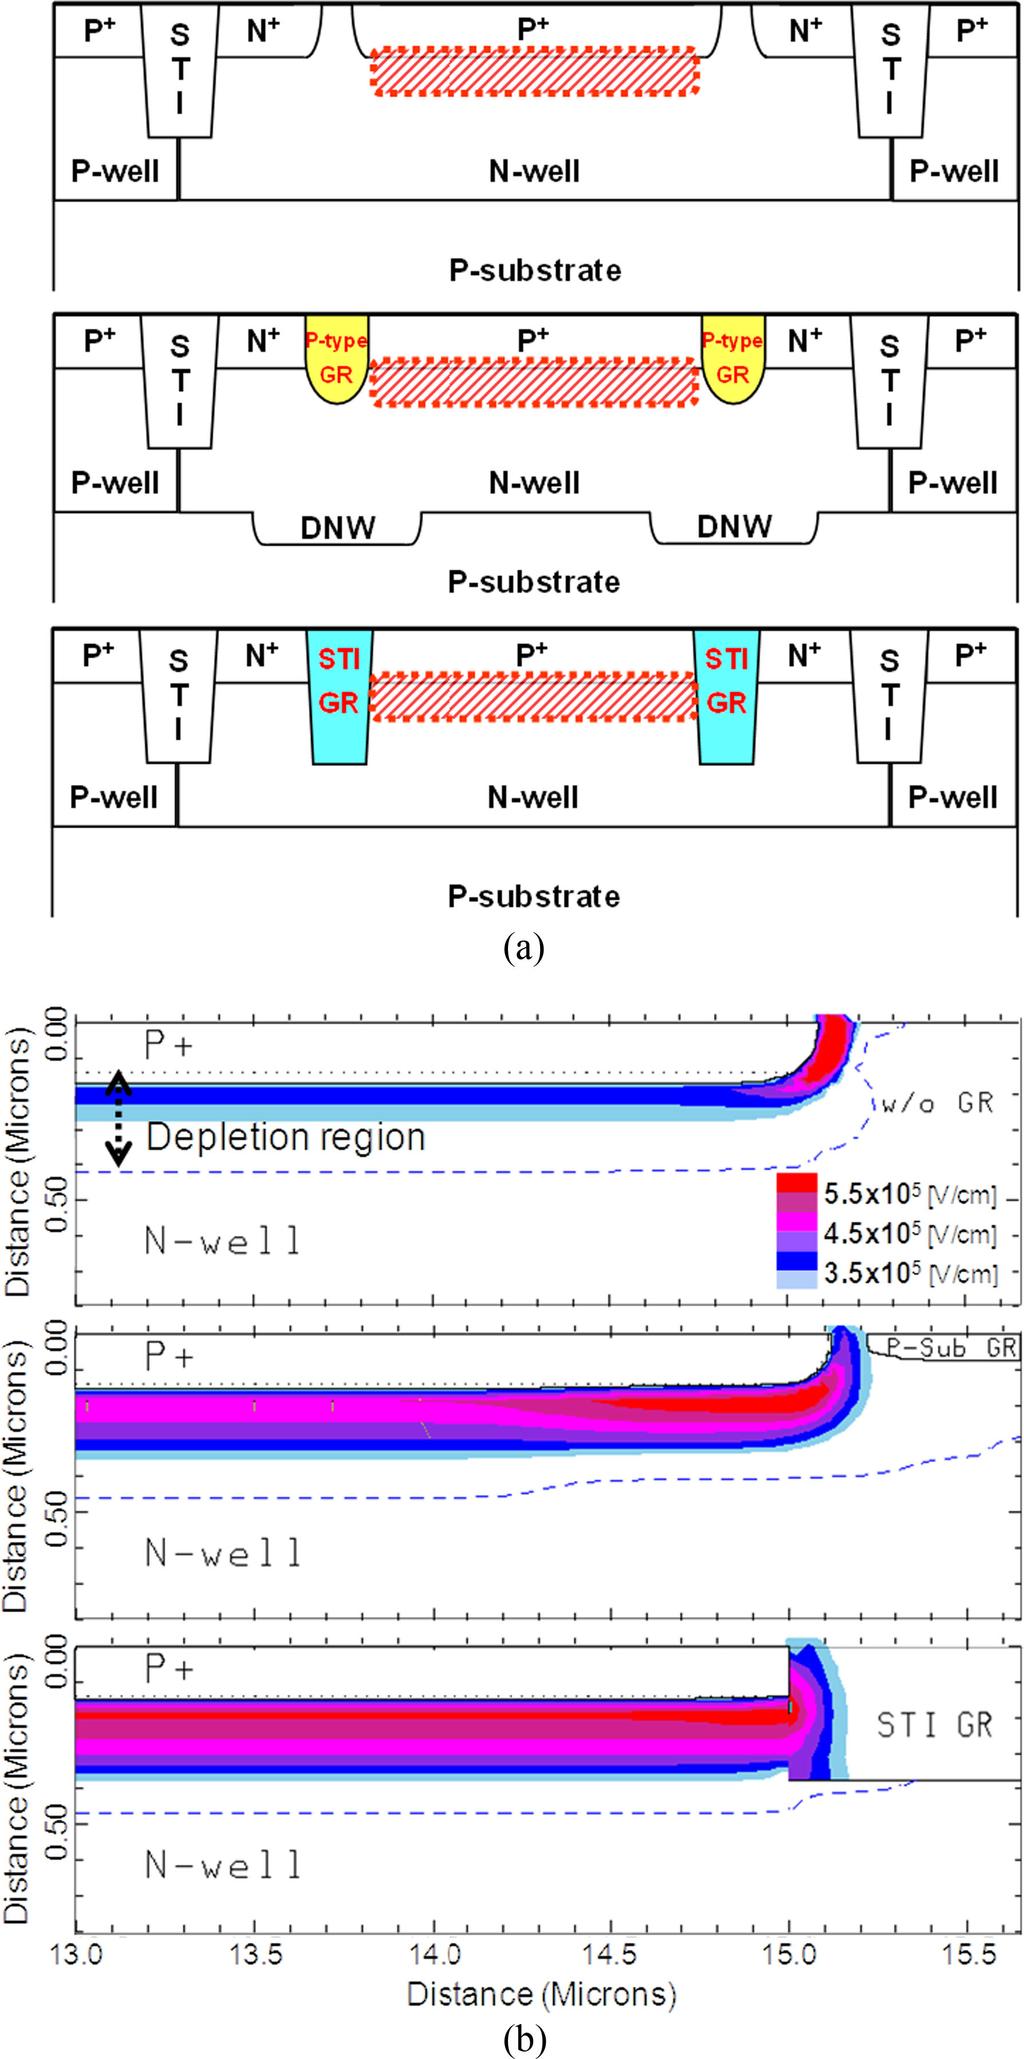 LEE AND CHOI: PERFORMANCE OPTIMIZATION AND IMPROVEMENT OF SILICON APDS IN STANDARD CMOS TECHNOLOGY 3801013 Fig. 10. Light emission tests of the fabricated CMOS-APDs: (a) w/ P-sub GR and (b) w/ STI.